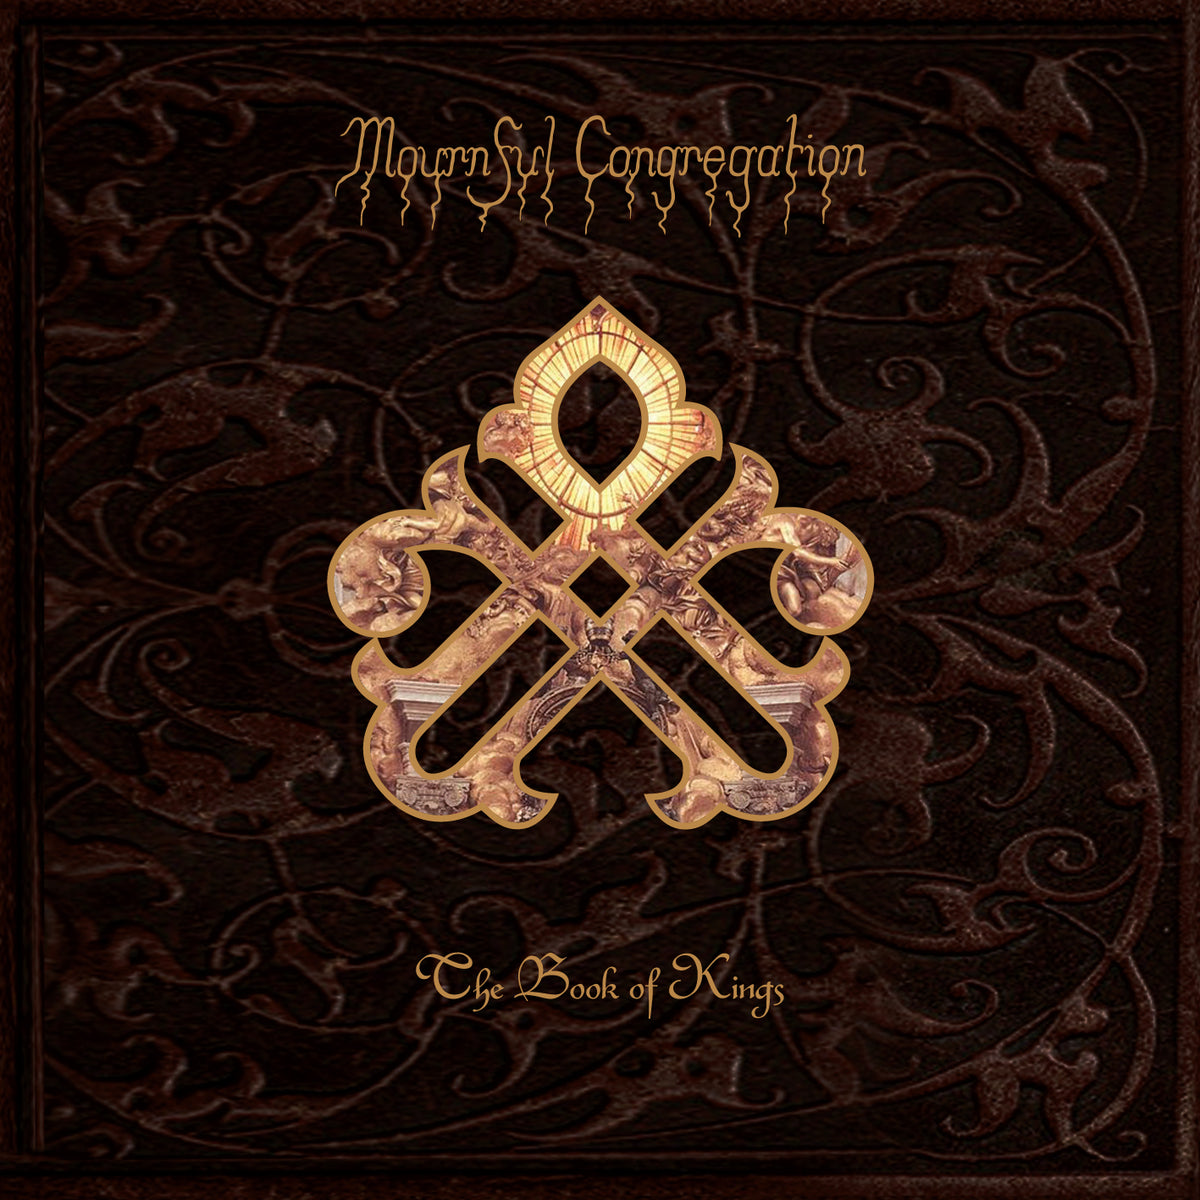 MOURNFUL CONGREGATION - THE BOOK OF KINGS 2XLP